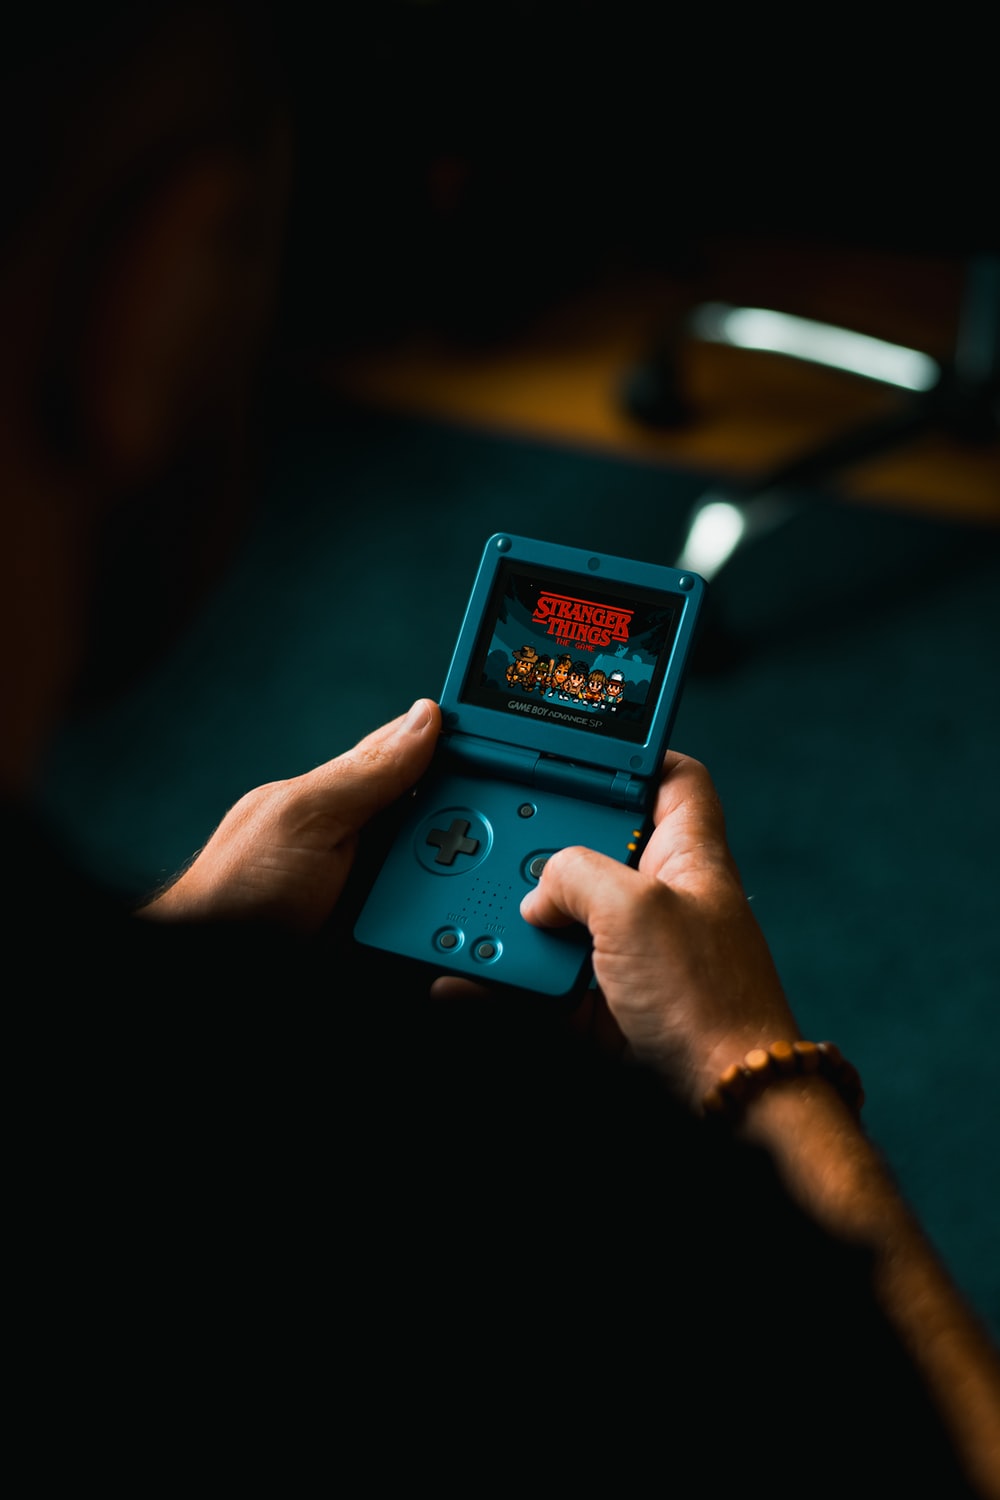 Gameboy Picture. Download Free Image